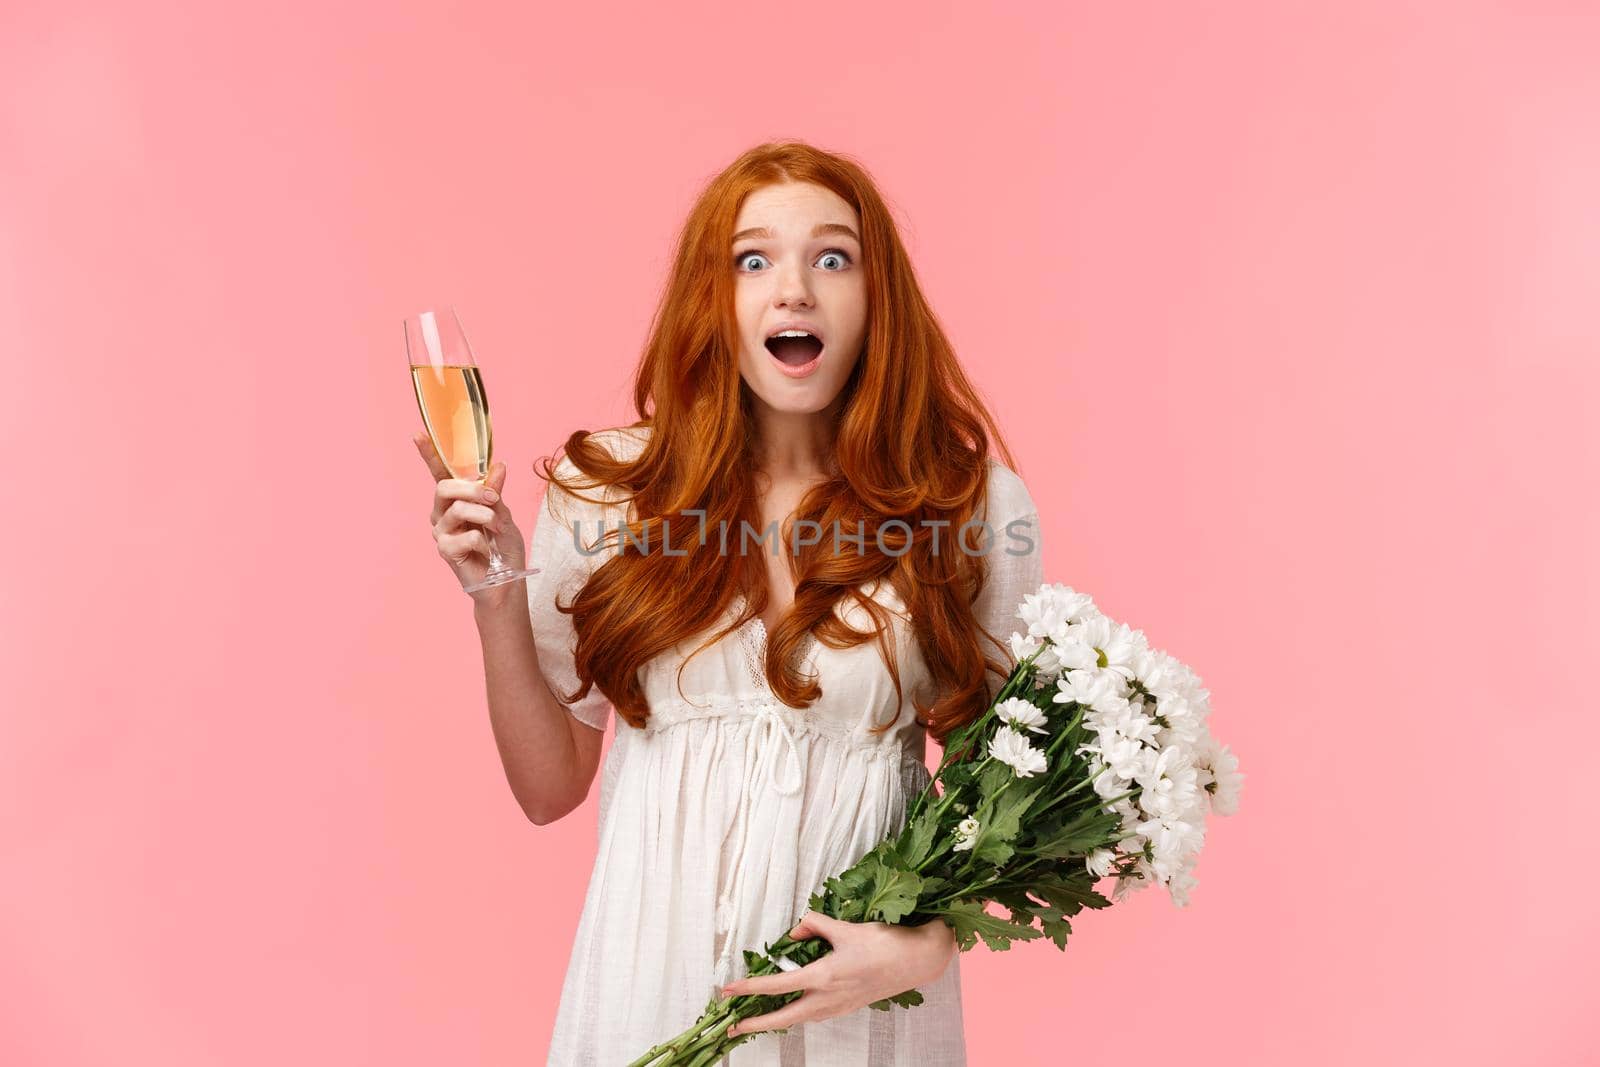 Excited and touched amused birthday girl receiving congratulations, look fascinated and surprised at camera, open mouth wondered, holding glass champagne and bouquet flowers, pink background.